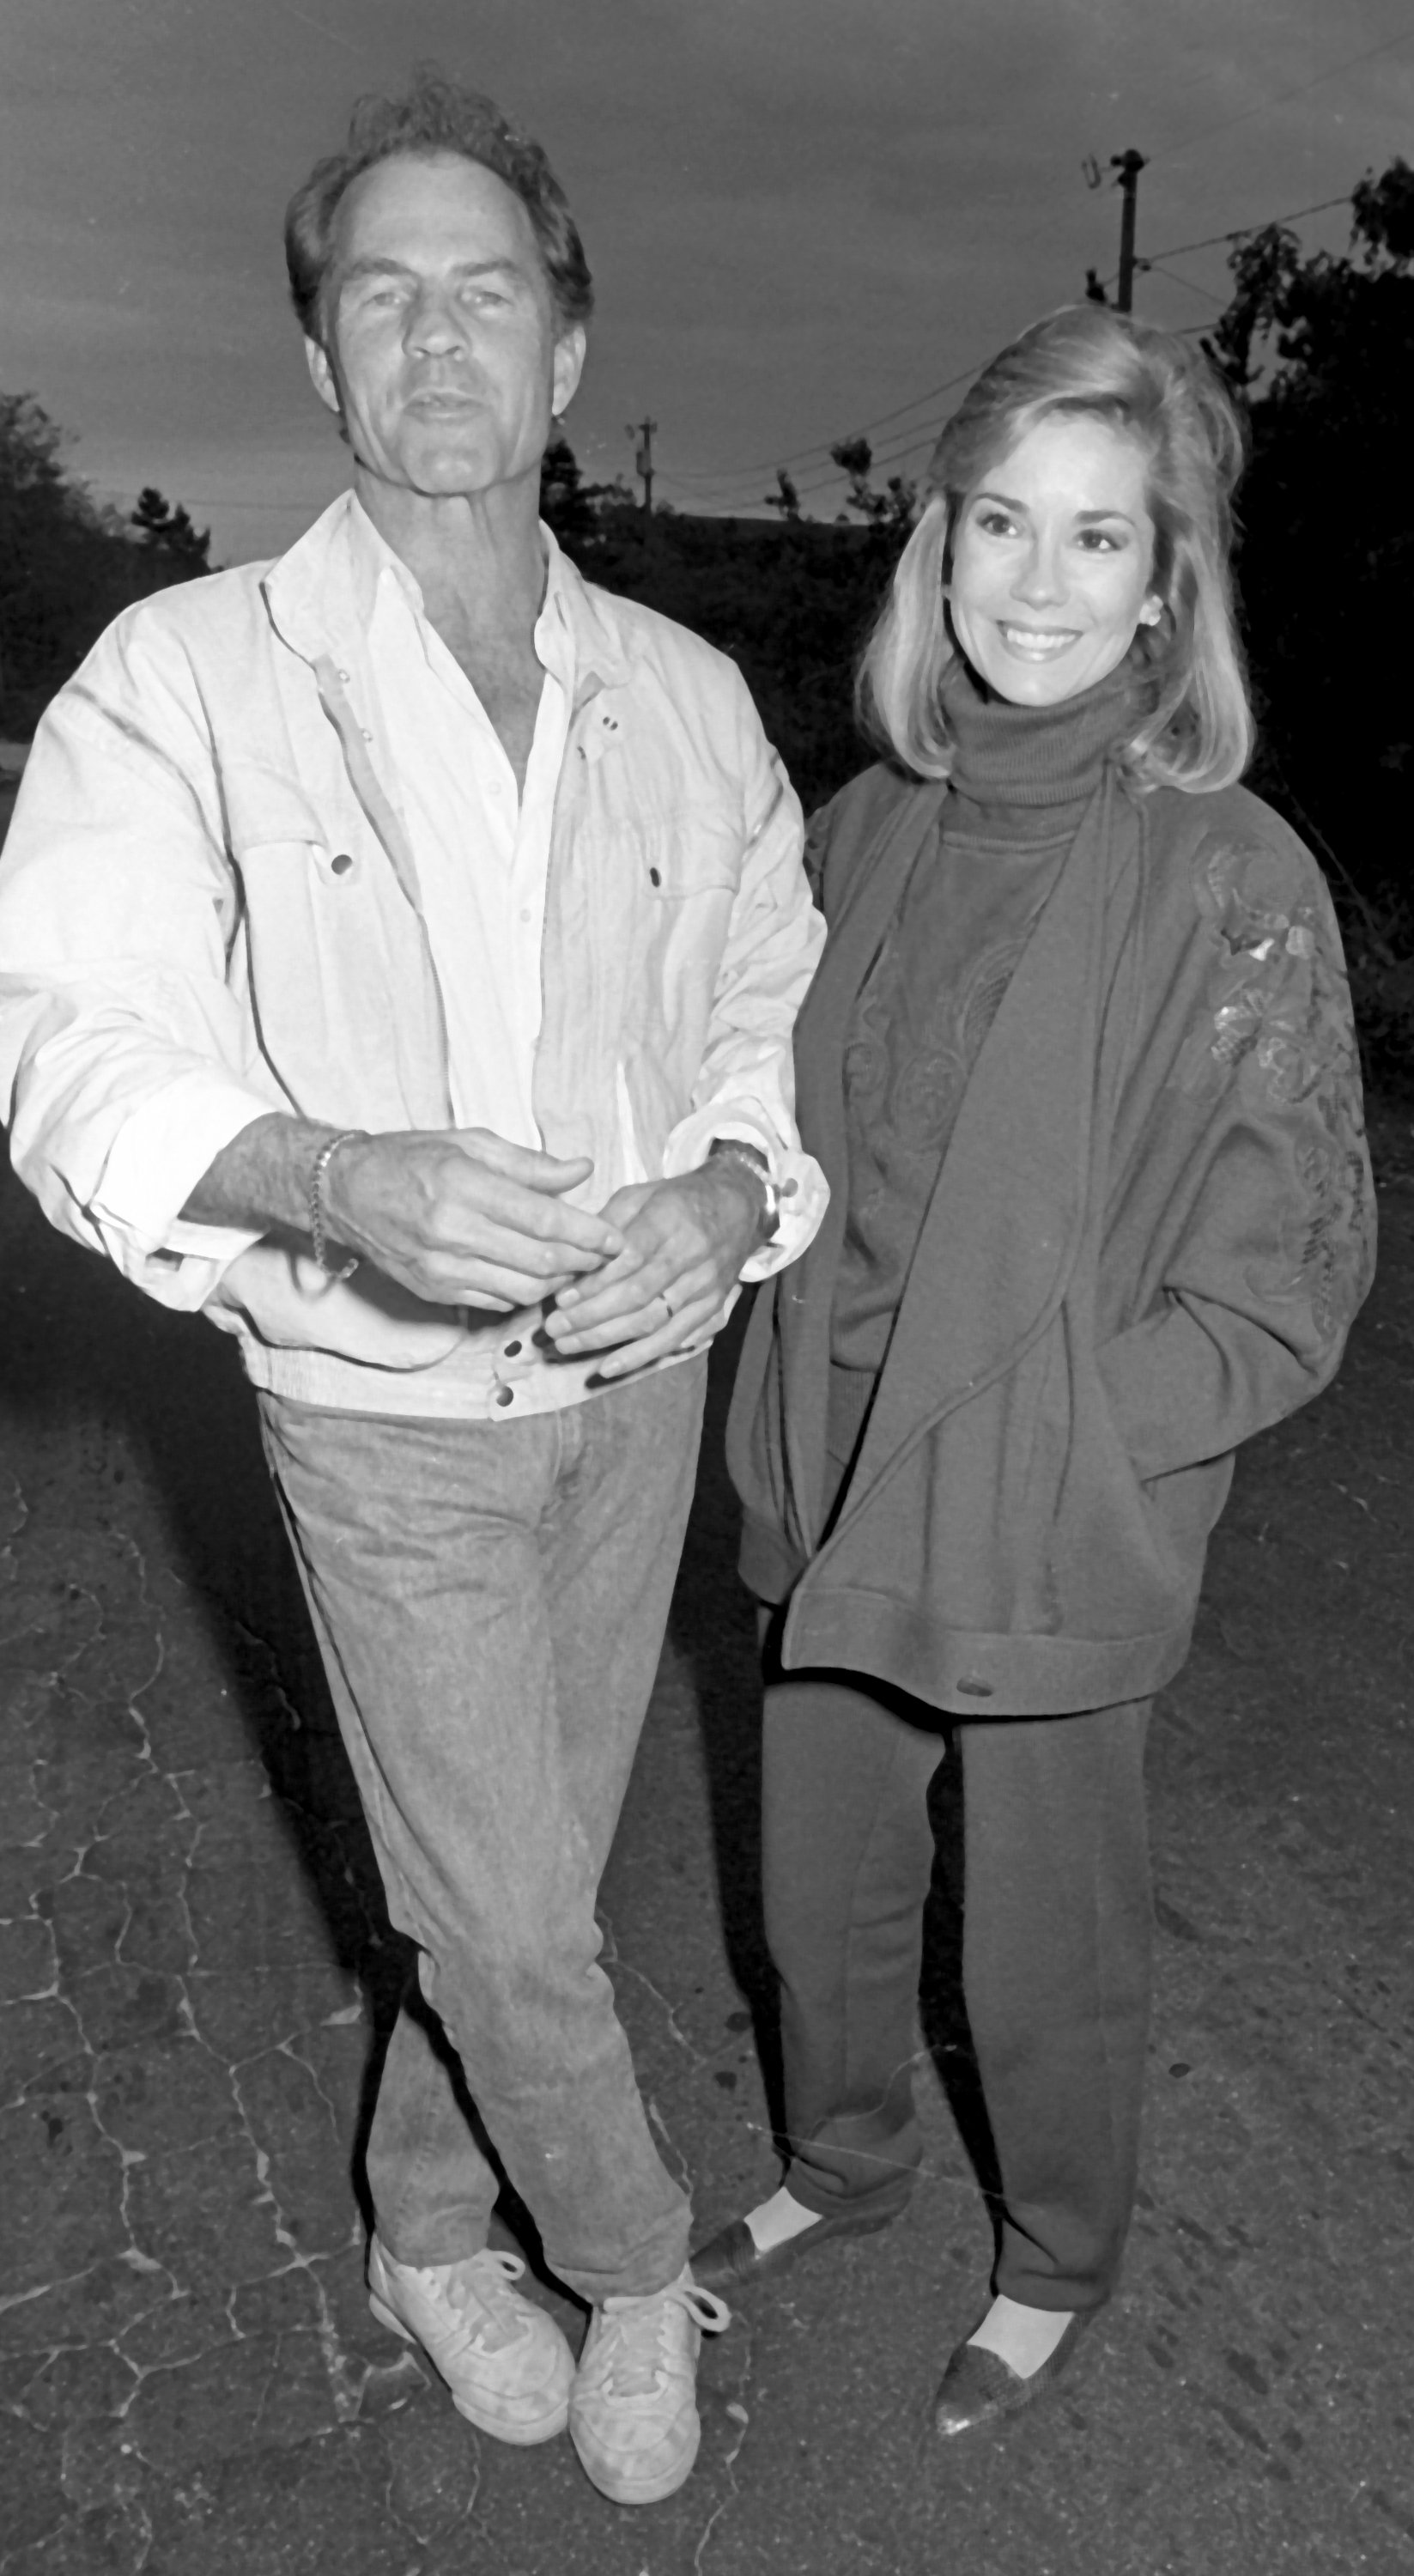 Frank Gifford and Kathie Lee Johnson at their wedding reception on October 18, 1986, in Bridgehampton, New York. | Source: Ron Galella/Ron Galella Collection/Getty Images